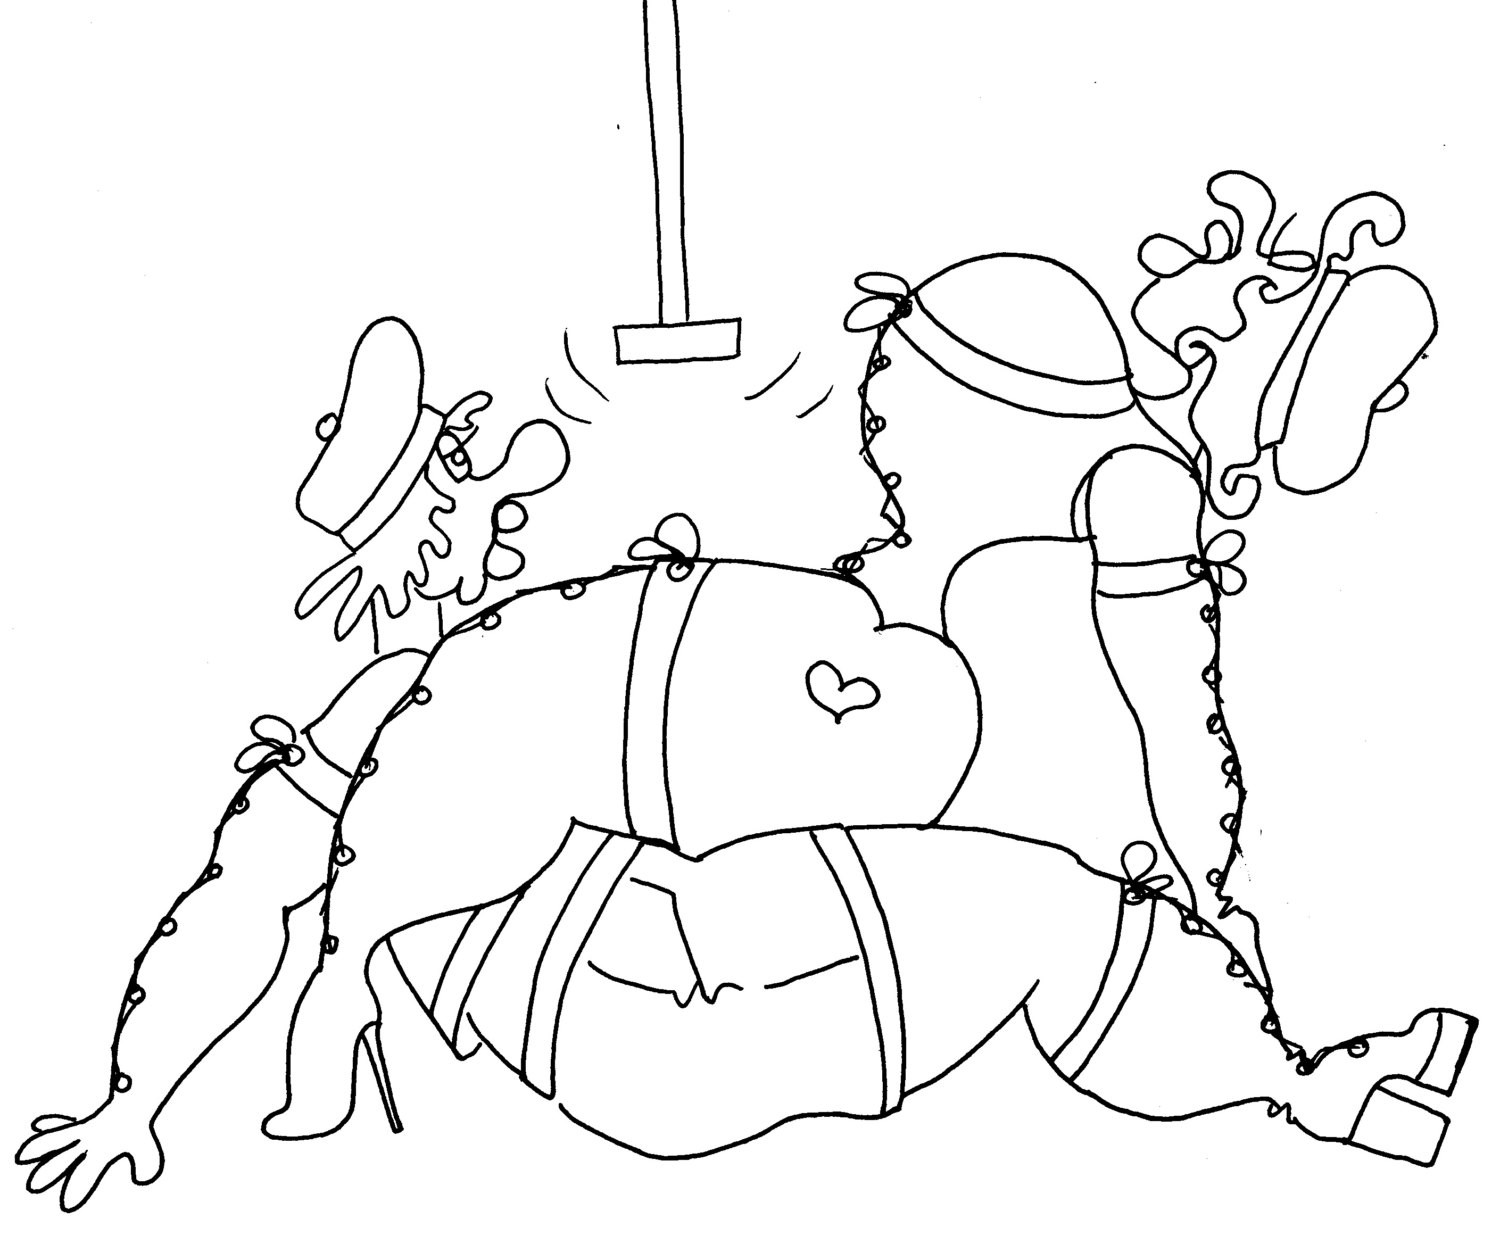 Kama Sutra Coloring Book
 The Spider Kama Sutra Pose y Coloring Pages from the